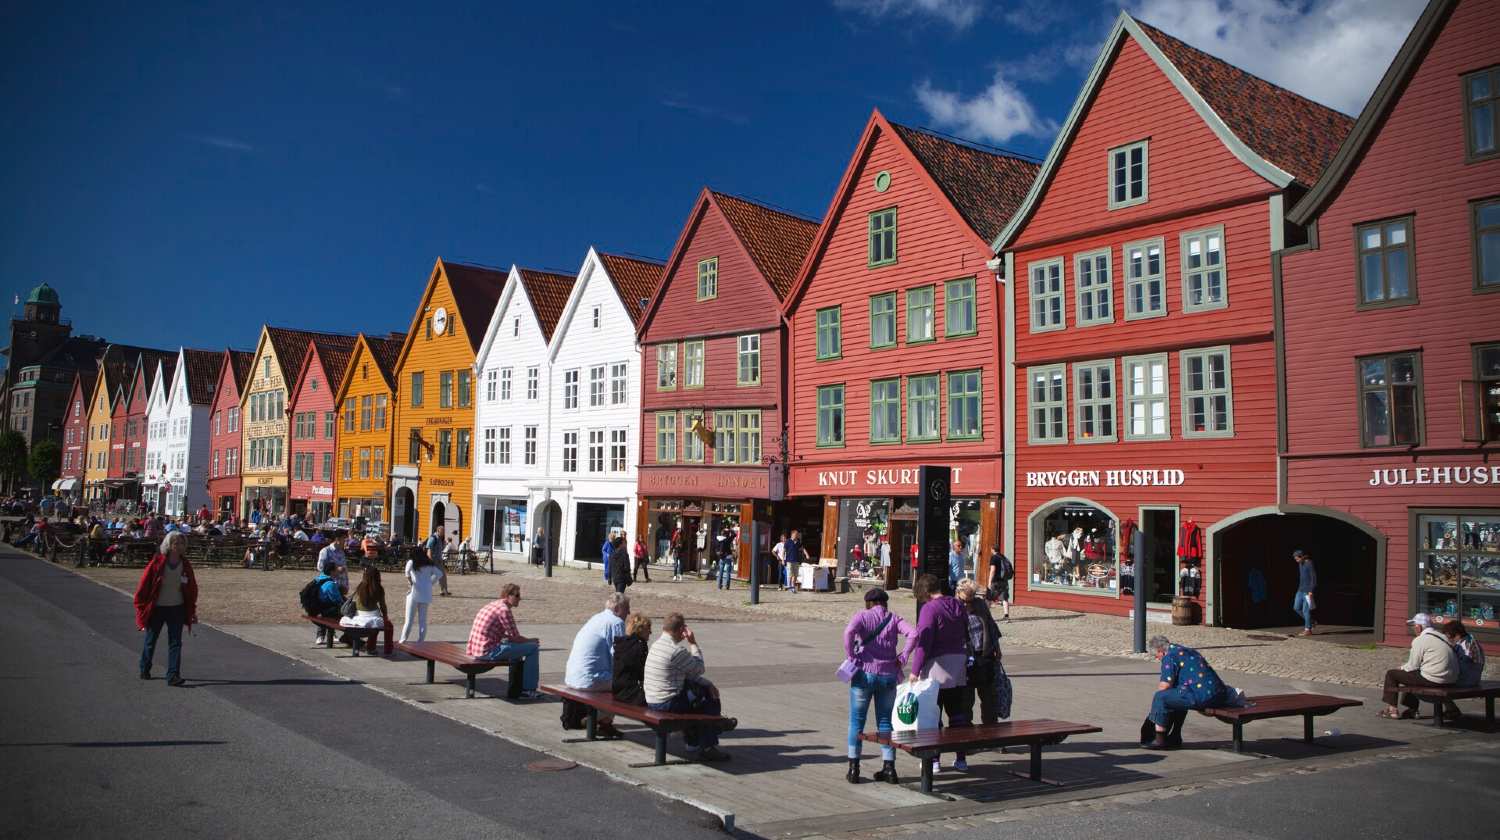 Accommodation for groups at Bryggen